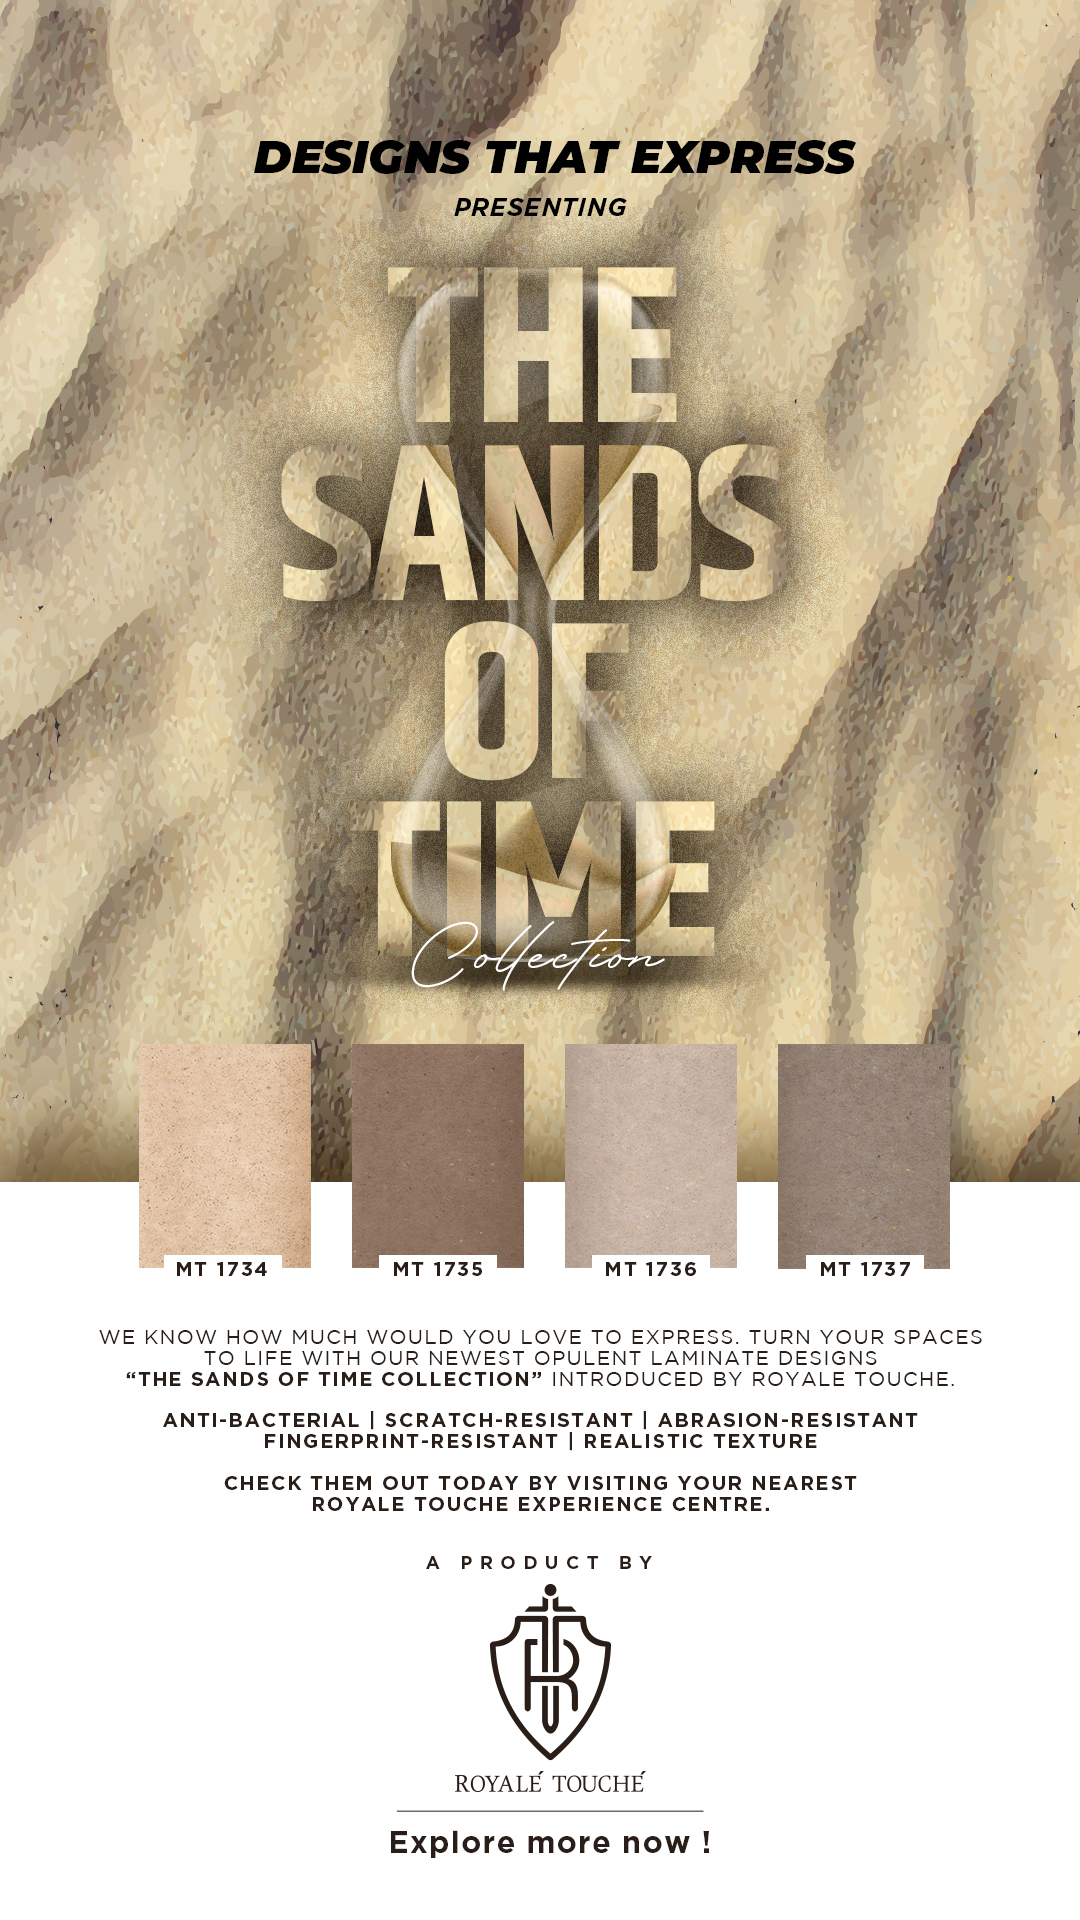 The Sands of Time Collection